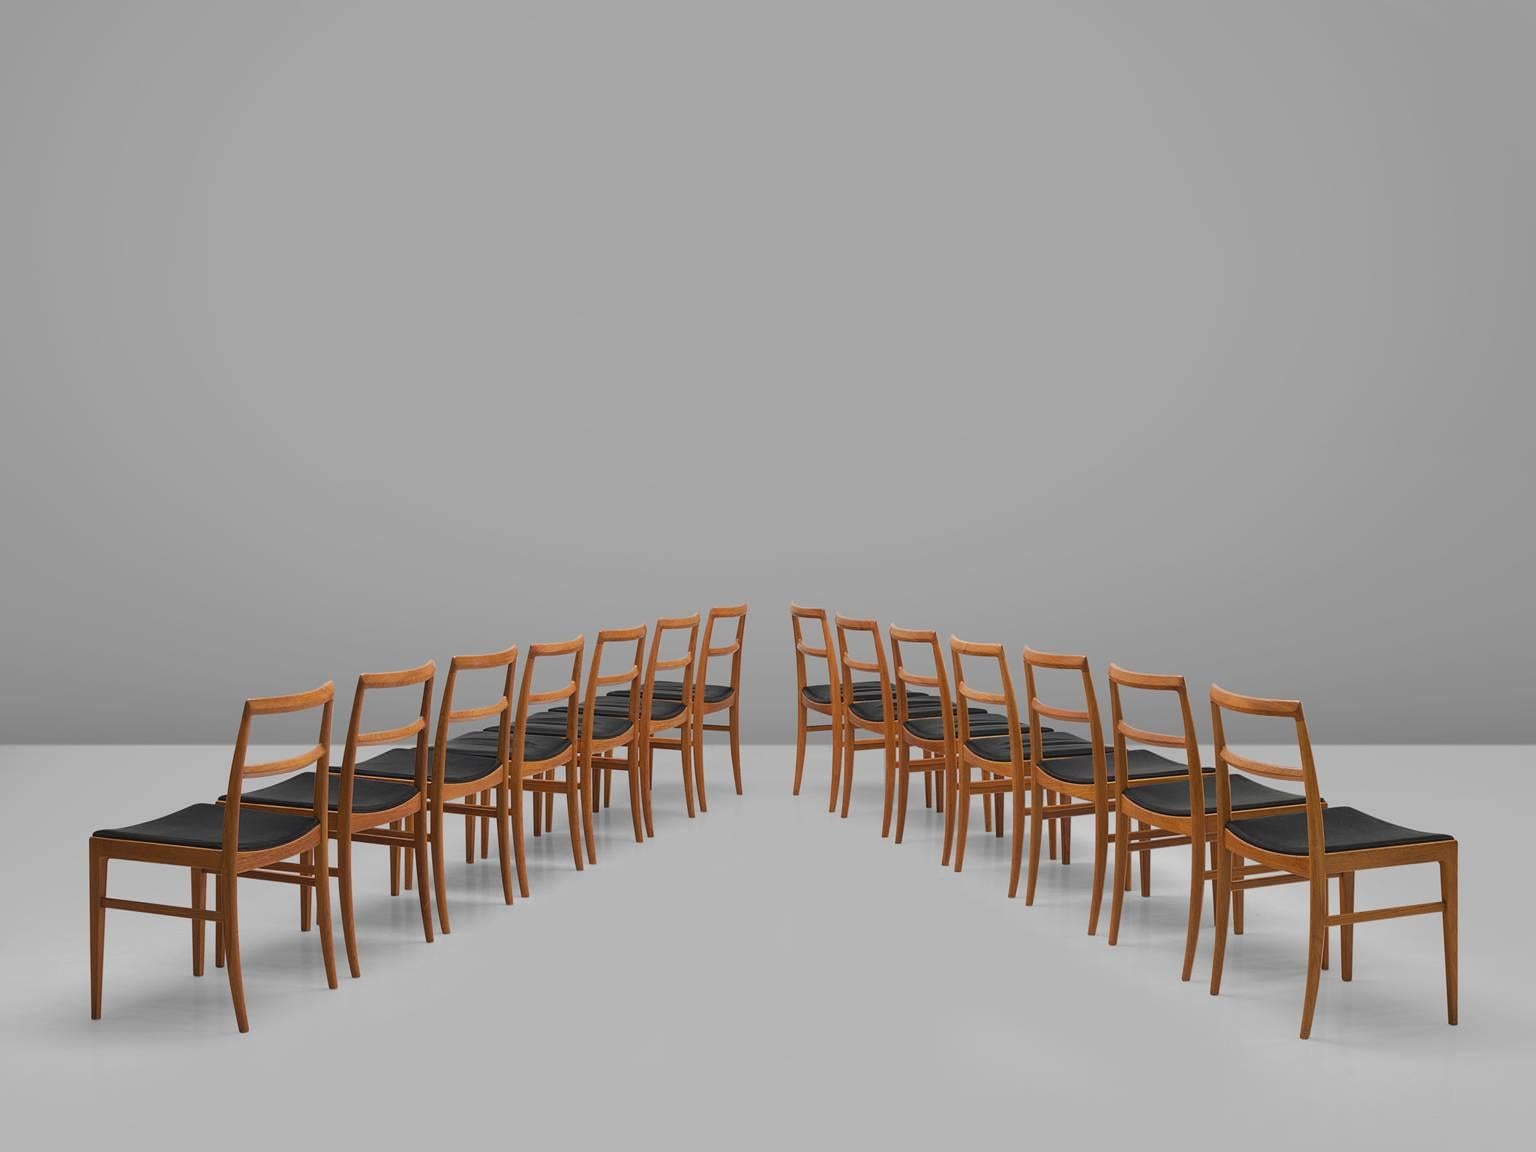 Arne Vodder for Sibast Møbler, set of fourteen '430' dining chairs, teak and leather, by Denmark, 1960s. 

This large set of fourteen chairs is designed by the Danish designer Arne Vodder. The basic and linear design gives these chairs a feel of